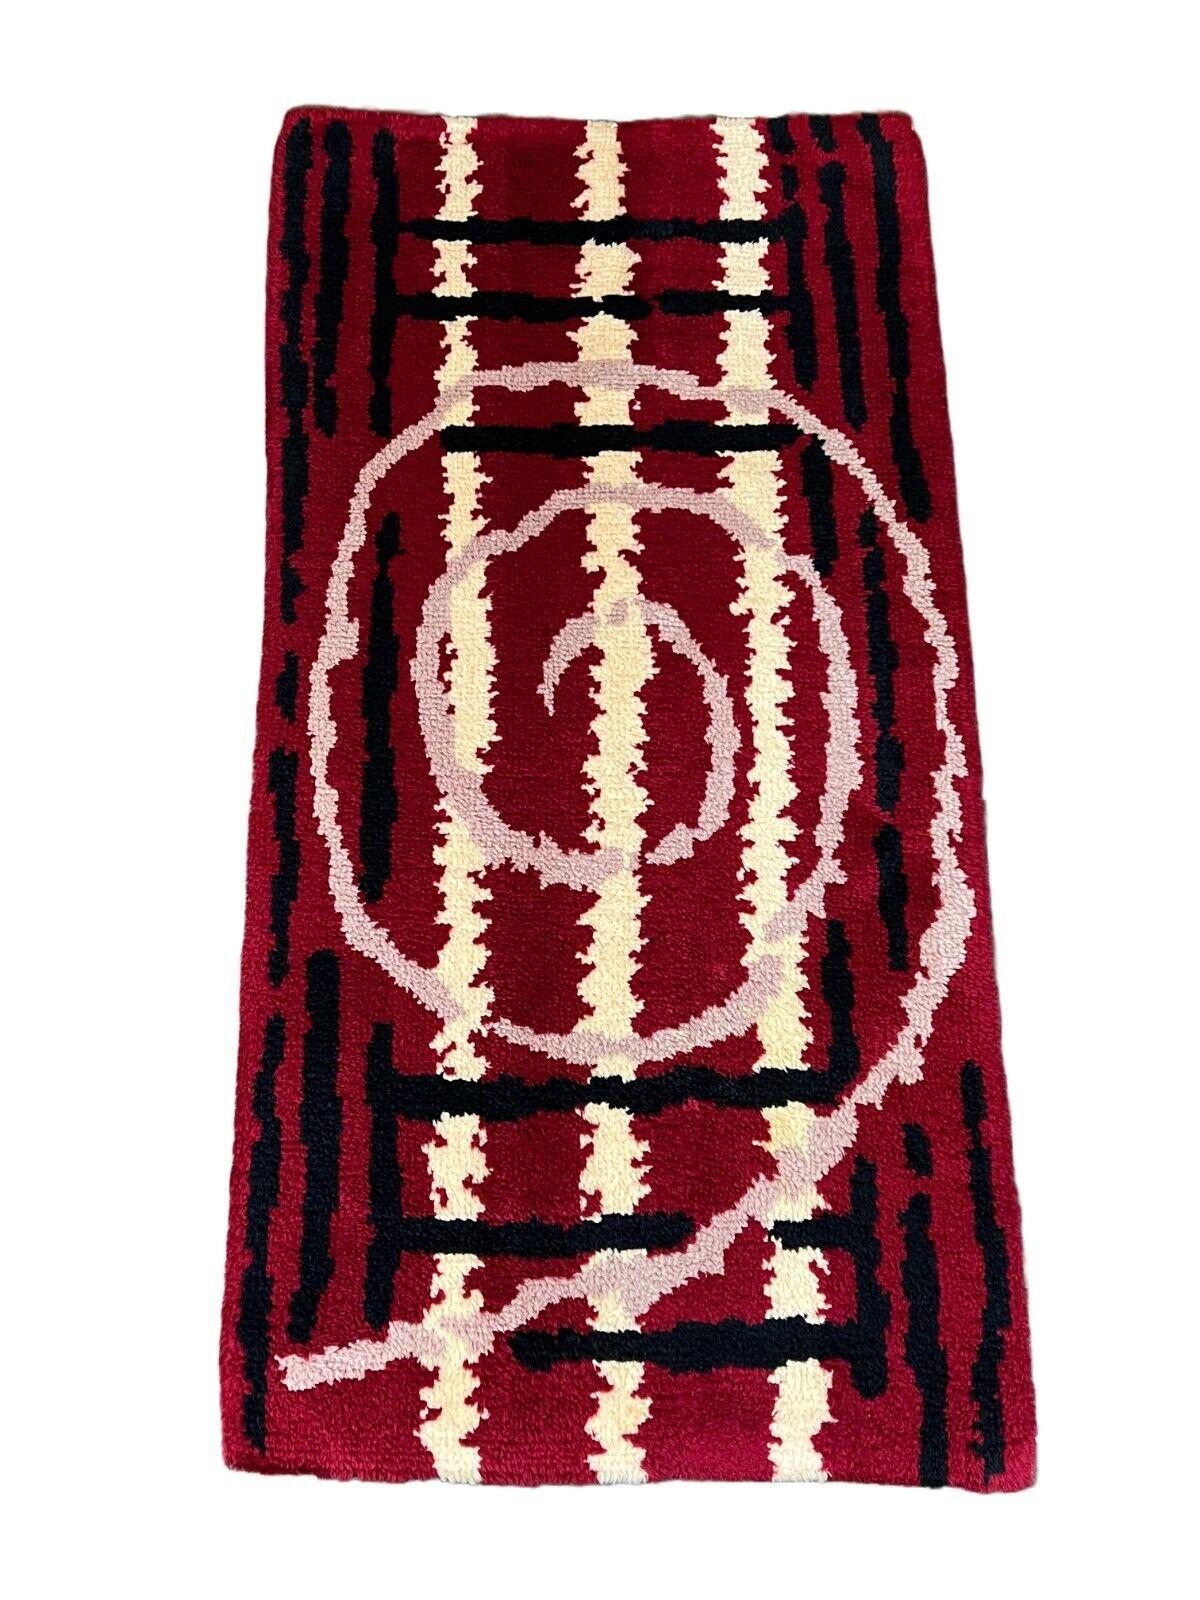 1960s-1970s runner rug carpet rug space age Denmark Danish Design

Object: carpet

Manufacturer:

Condition: good - vintage

Age: around 1960-1970

Dimensions:

Width = 90cm
Length = 180cm

Other notes:

The pictures serve as part